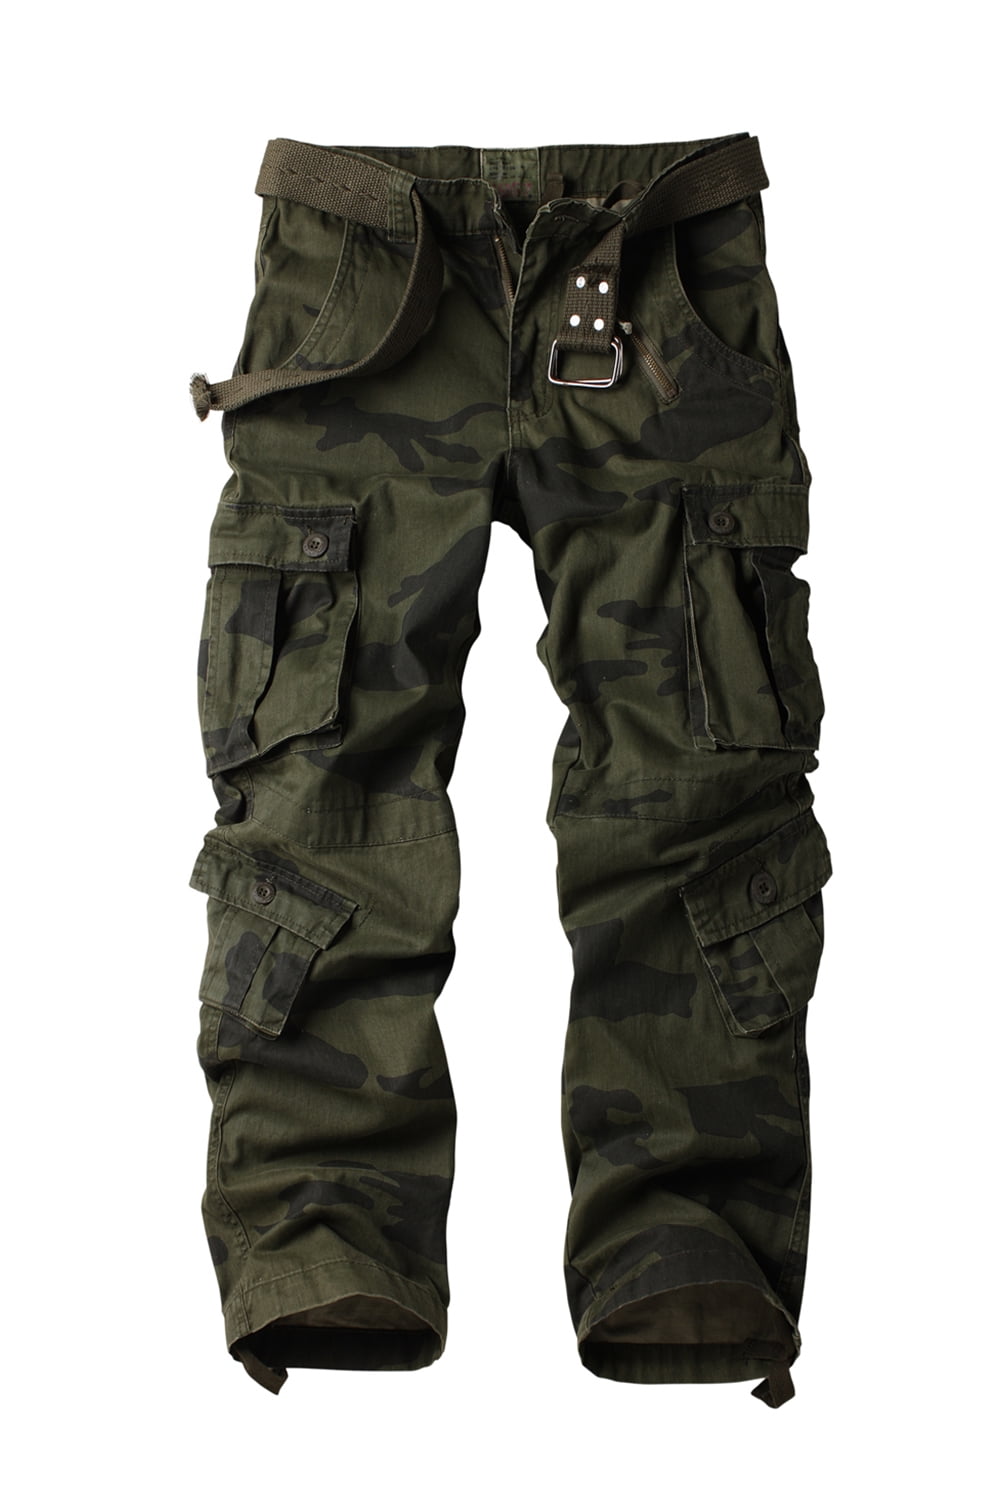 TRGPSG Men's Camo Cargo Pants with 8 Pockets Relaxed Fit Camo Pants(No ...